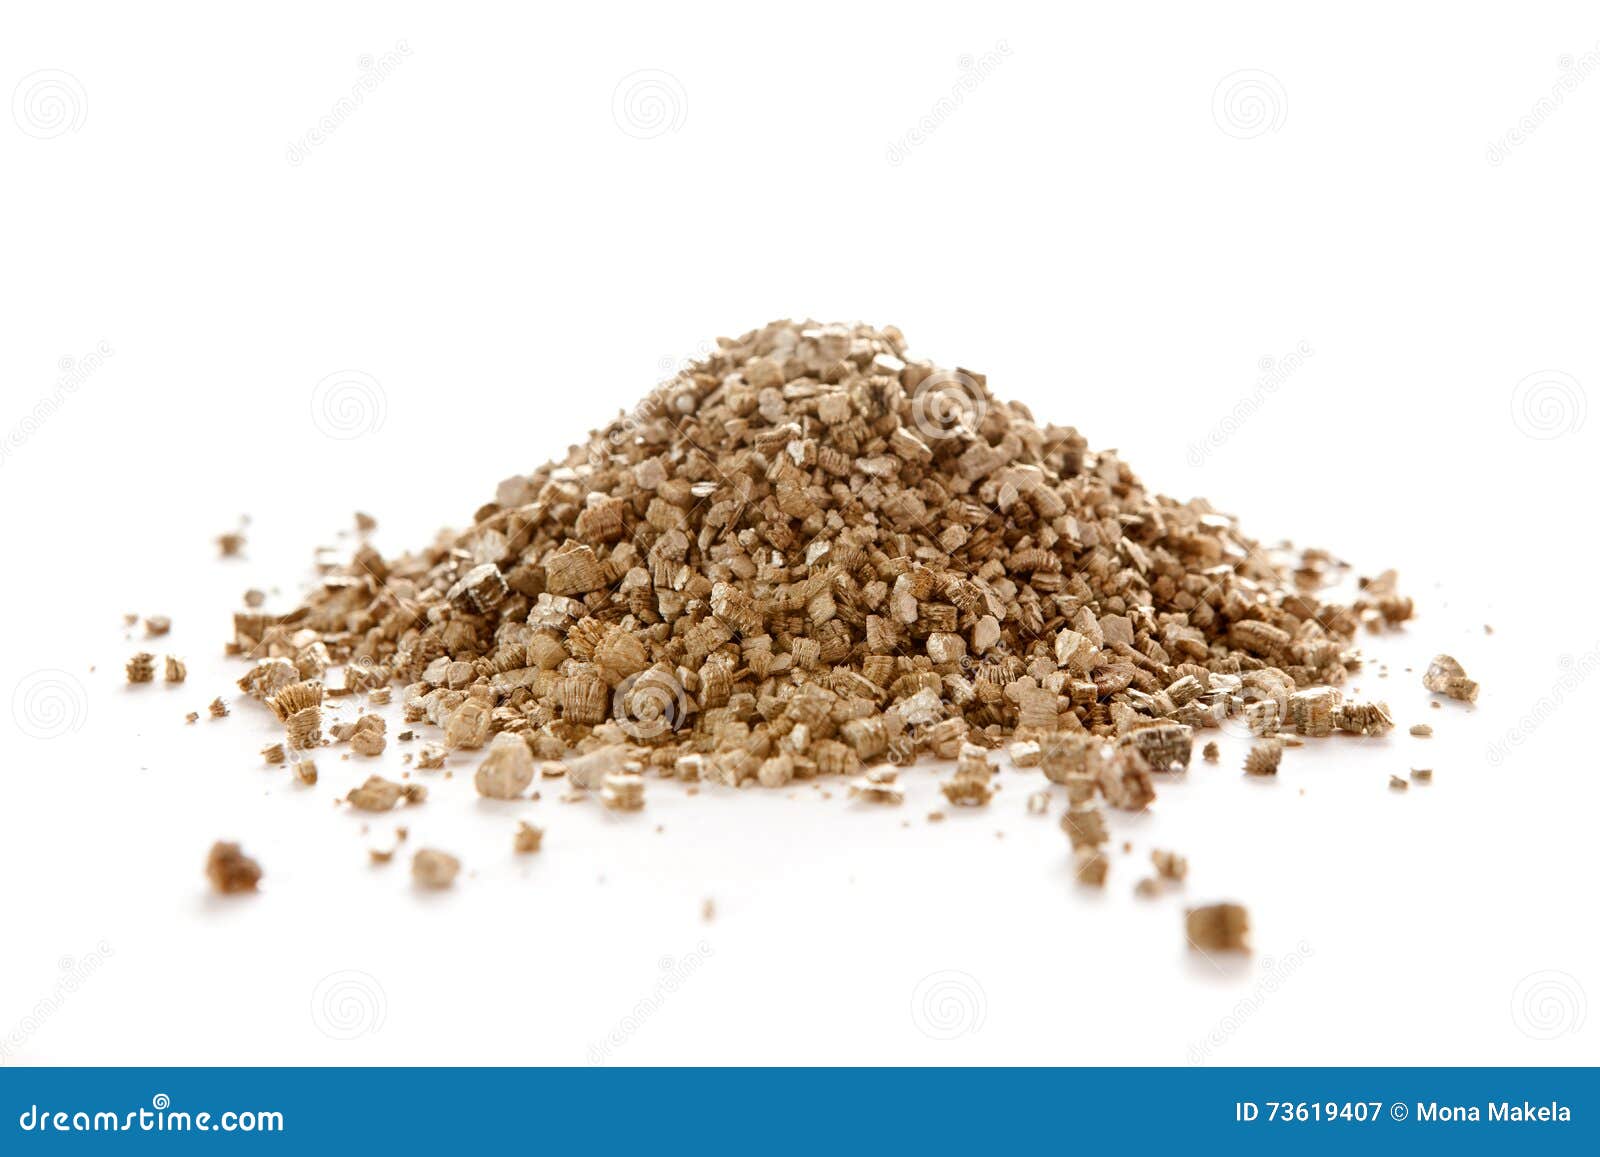 vermiculite is a versatile hydrous phyllosilicate mineral